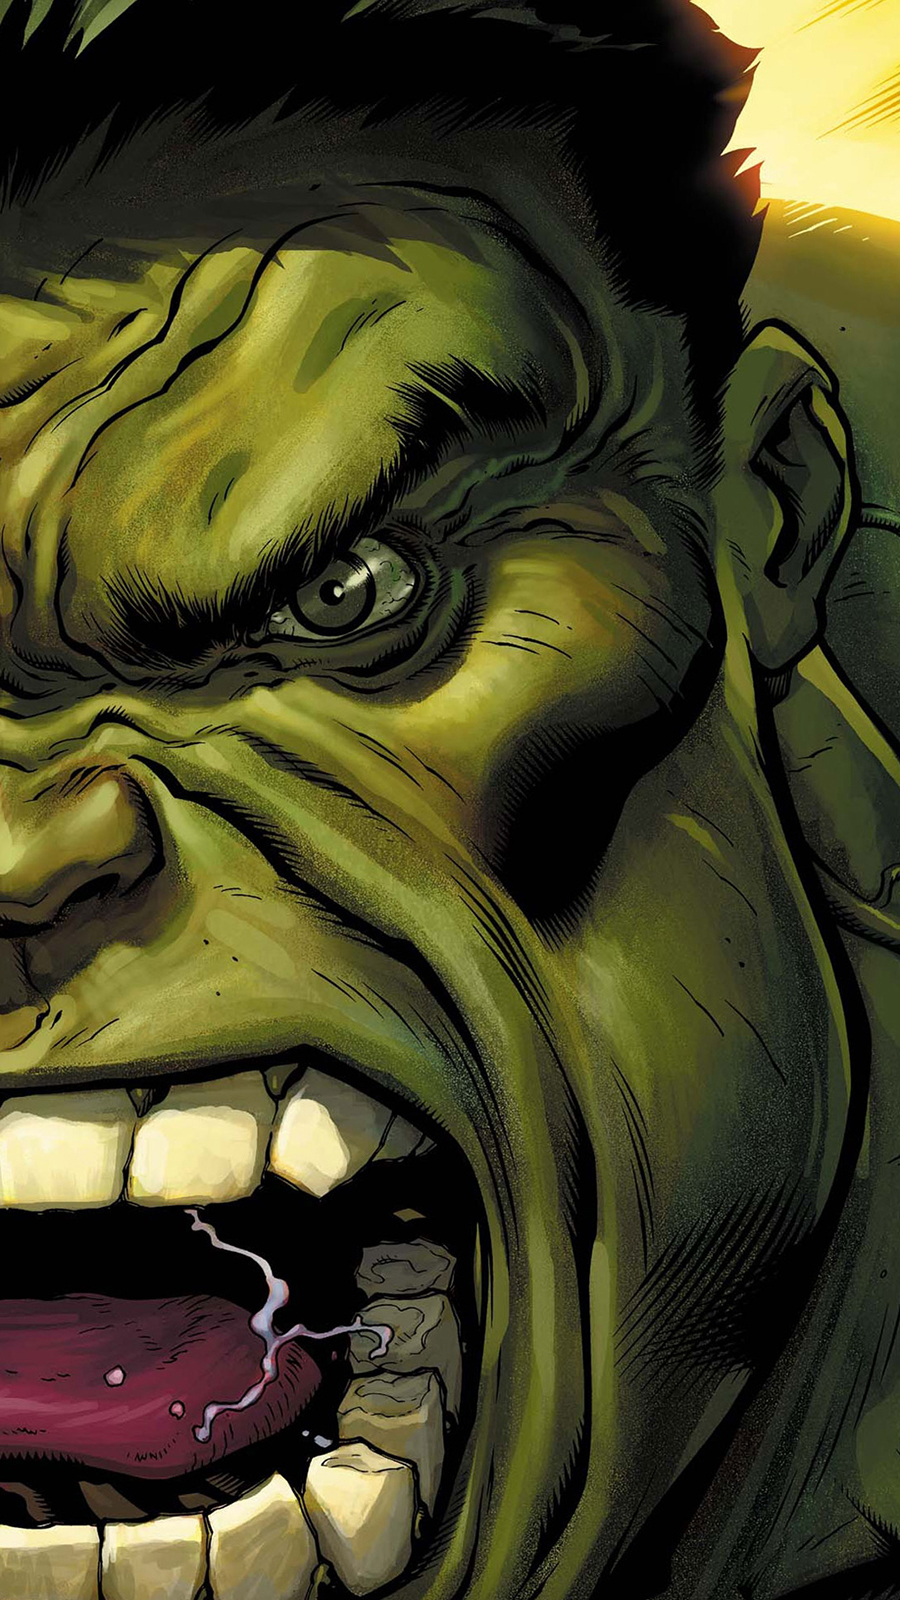 The Hulk Angry Green Face Android Wallpaper